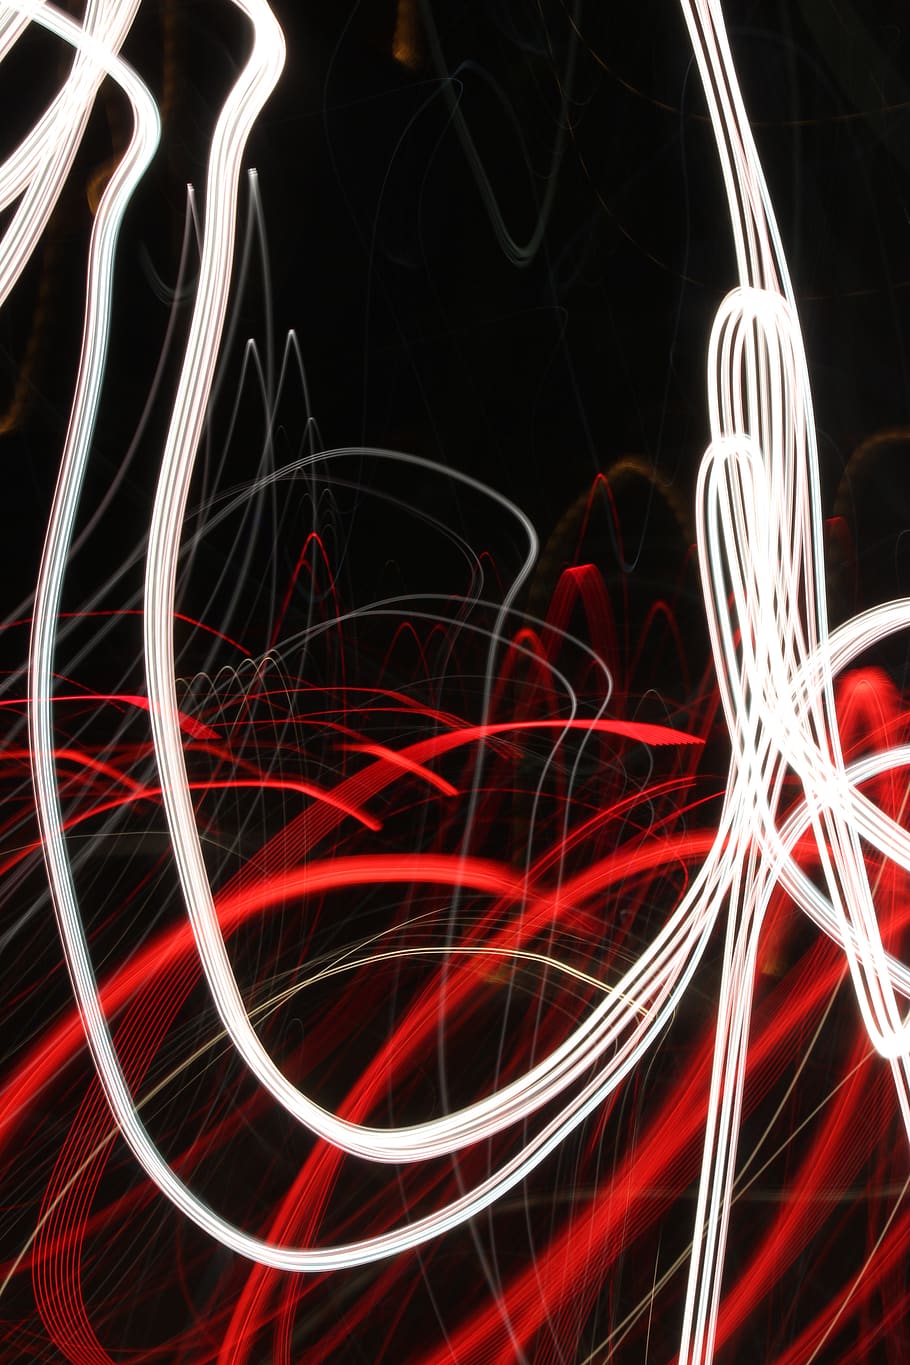 Light Streaks, lights, long-exposure, red, complexity, no people